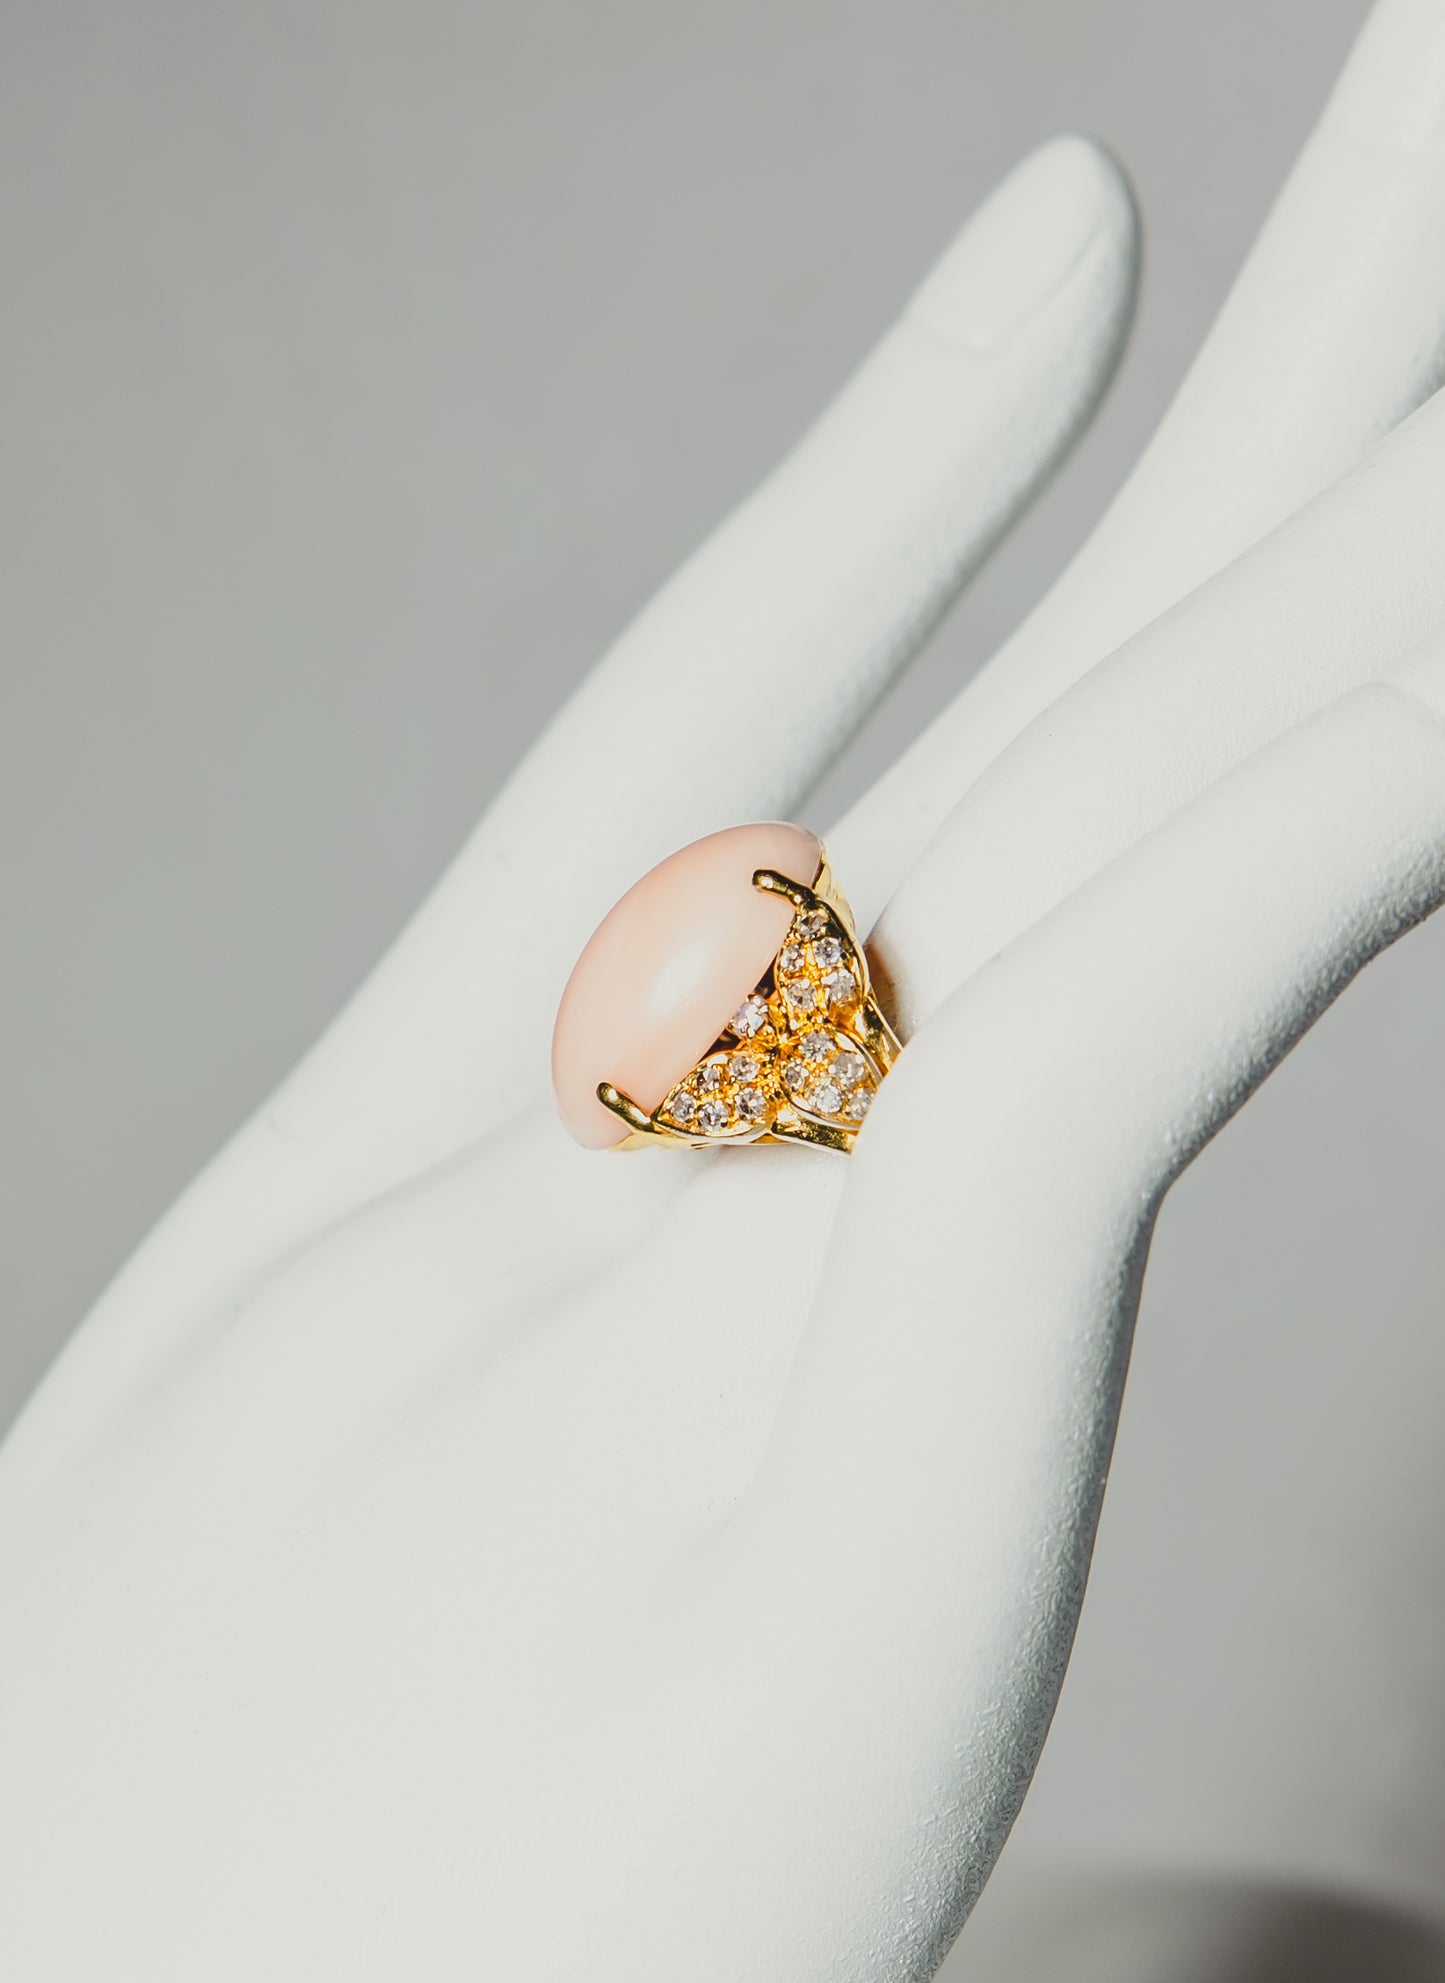 Coral and Diamond Ring